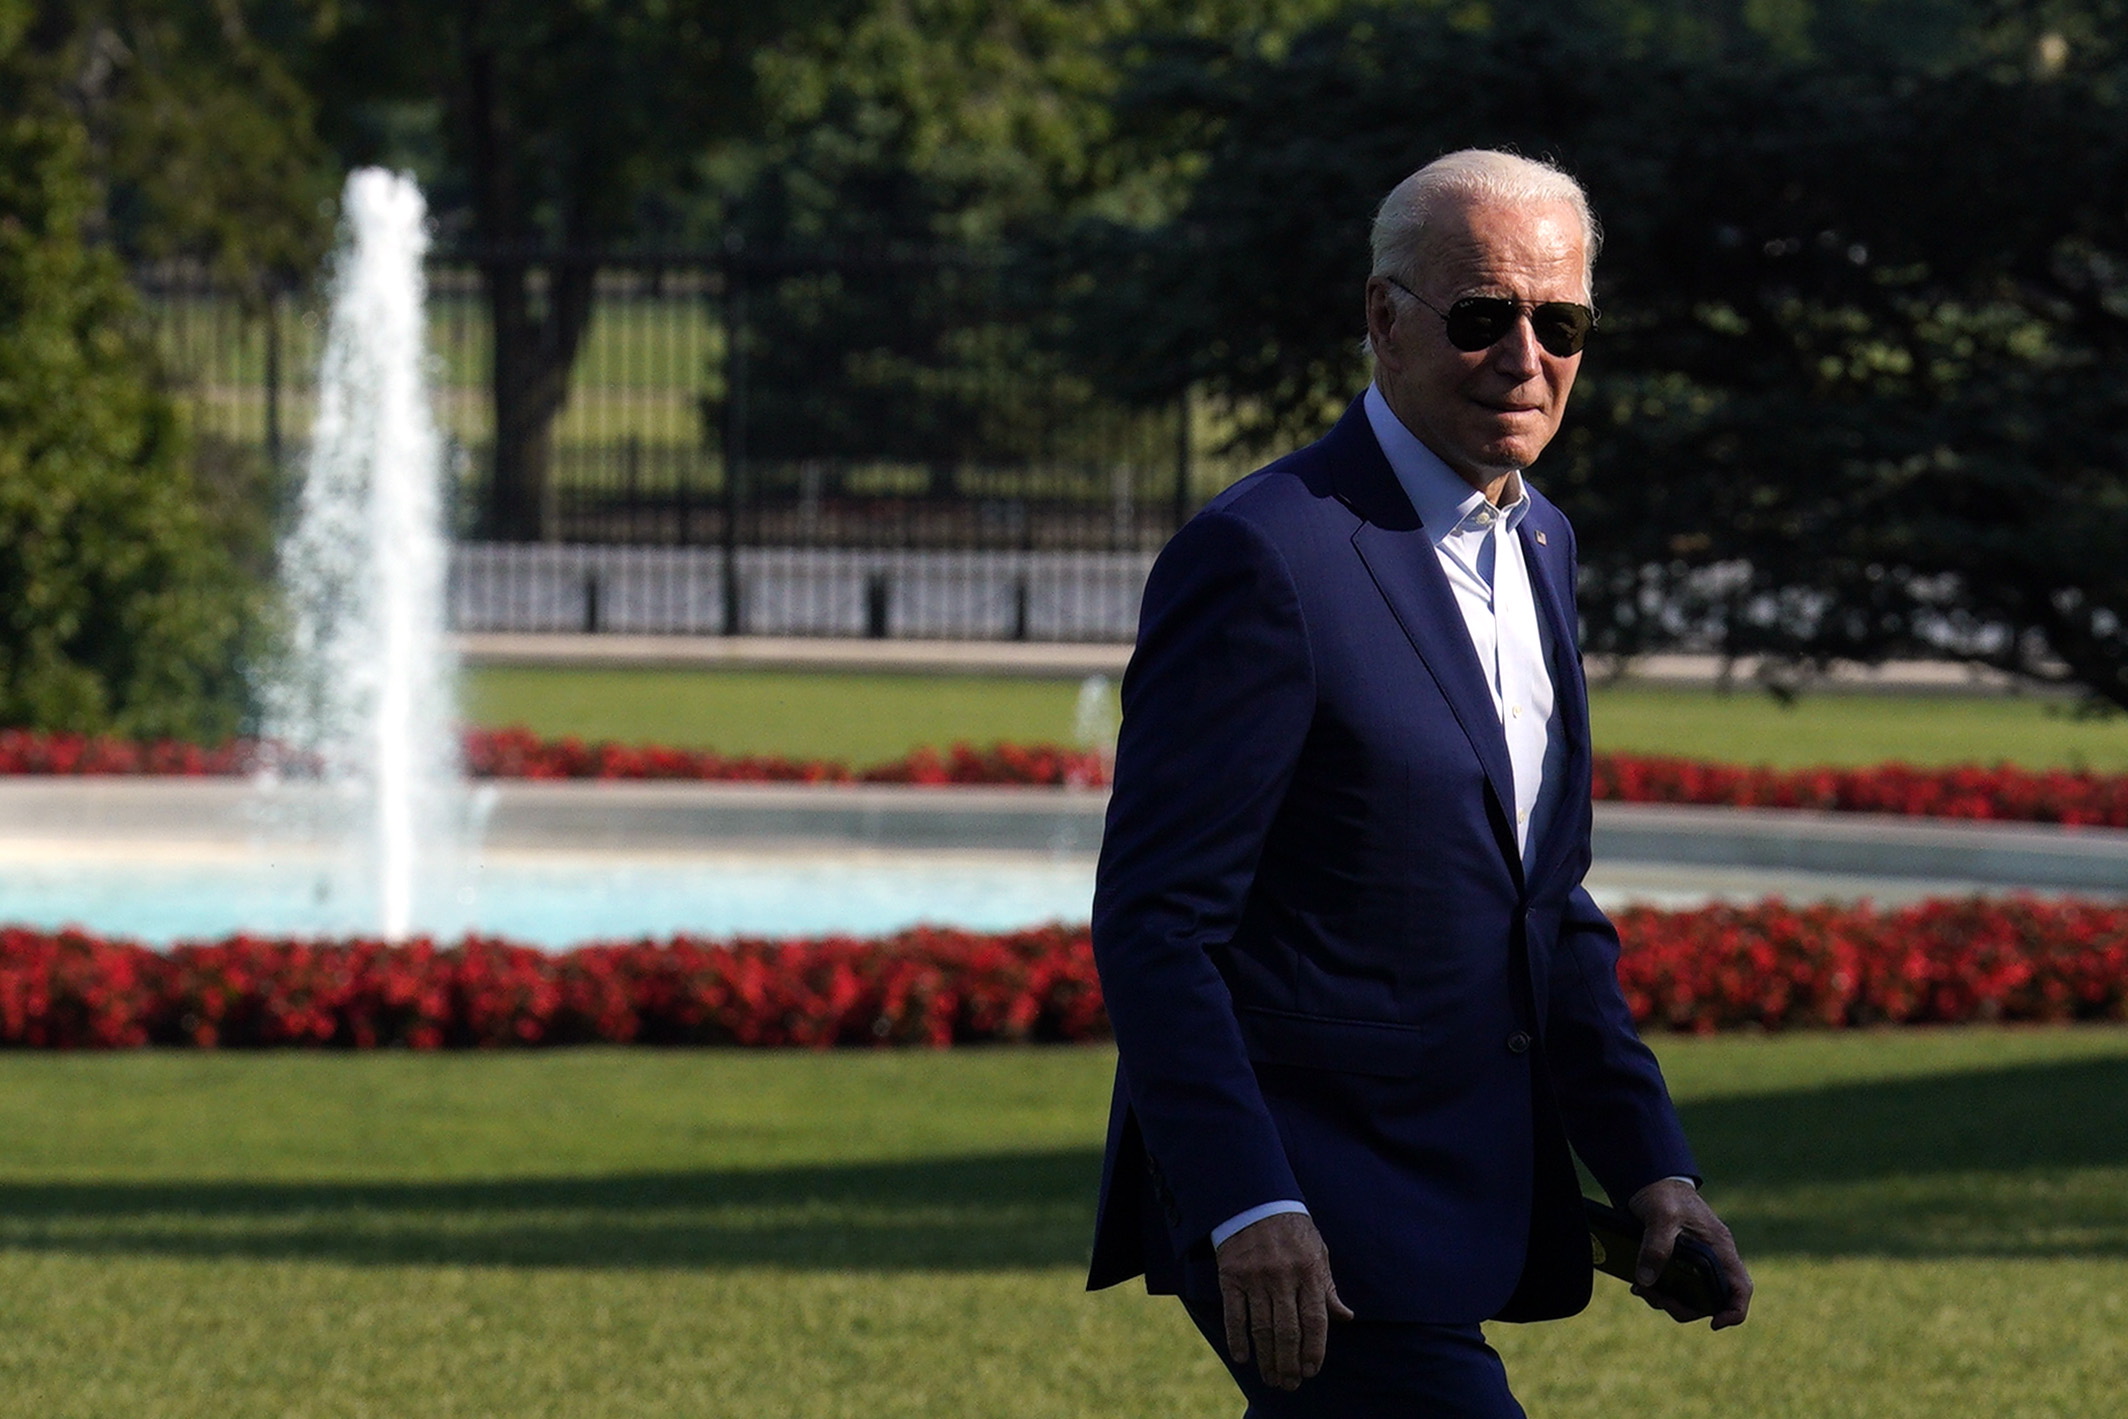 epa10084933 US President Joe Biden walks on the South Lawn of the White House after arriving in Washington, DC, USA, on 20 July 2022 (issued 21 July 2022) from Somerset, Massachusetts. Biden tested positive for COVID-19 and is experiencing very mild symptoms, according to a statement by White House press secretary Karine Jean-Pierre on 21 July.  EPA/Yuri Gripas / POOL